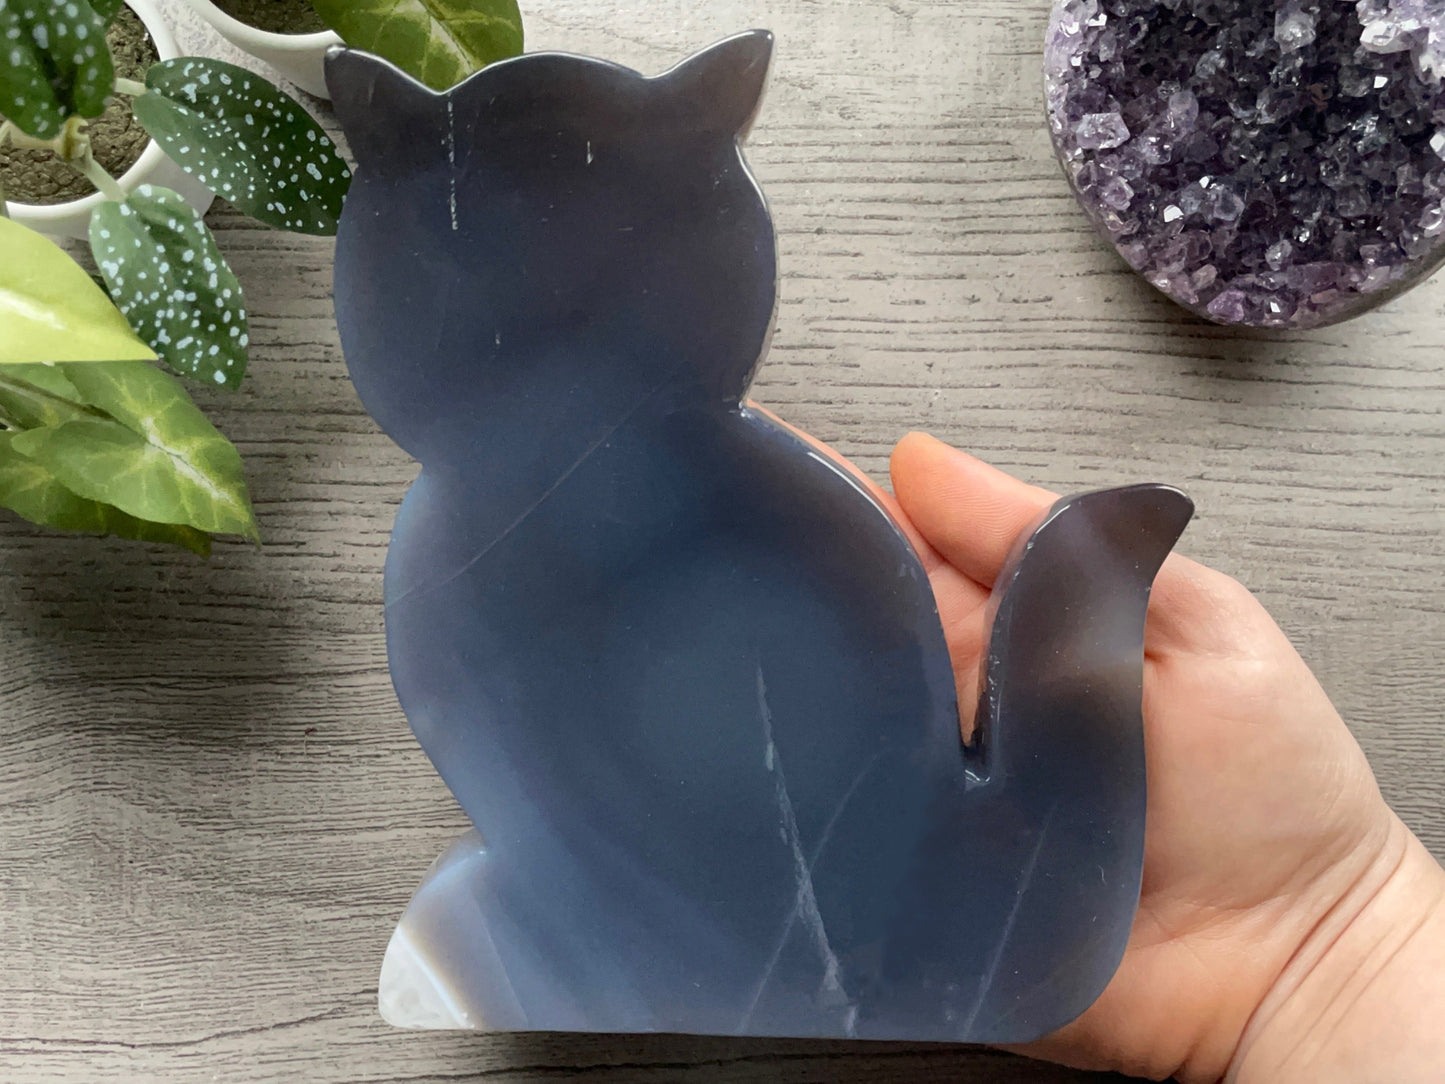 Pictured is a cat carved out of agate.